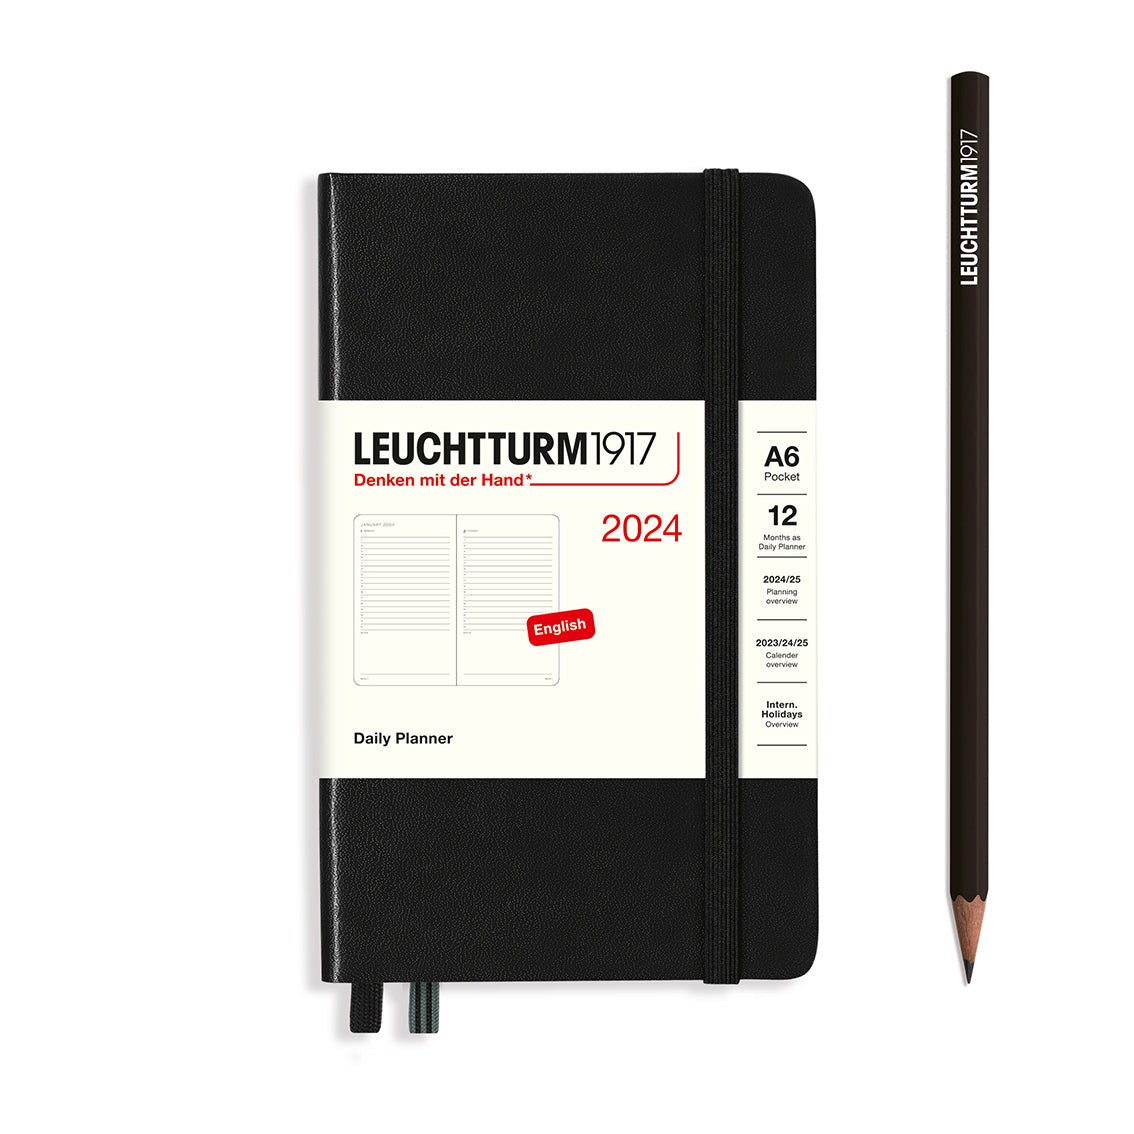 An image of a black planner with a black elastic band holding it together and a cream paper wrap around the middle stating the business name Leuchtturm1917, that it is for the year 2024, it is a daily planner, is A6 in size and an English language version. It has an image on the wrap showing the inside layout which is 1 day per page. A black pencil is shown at the side of the planner.